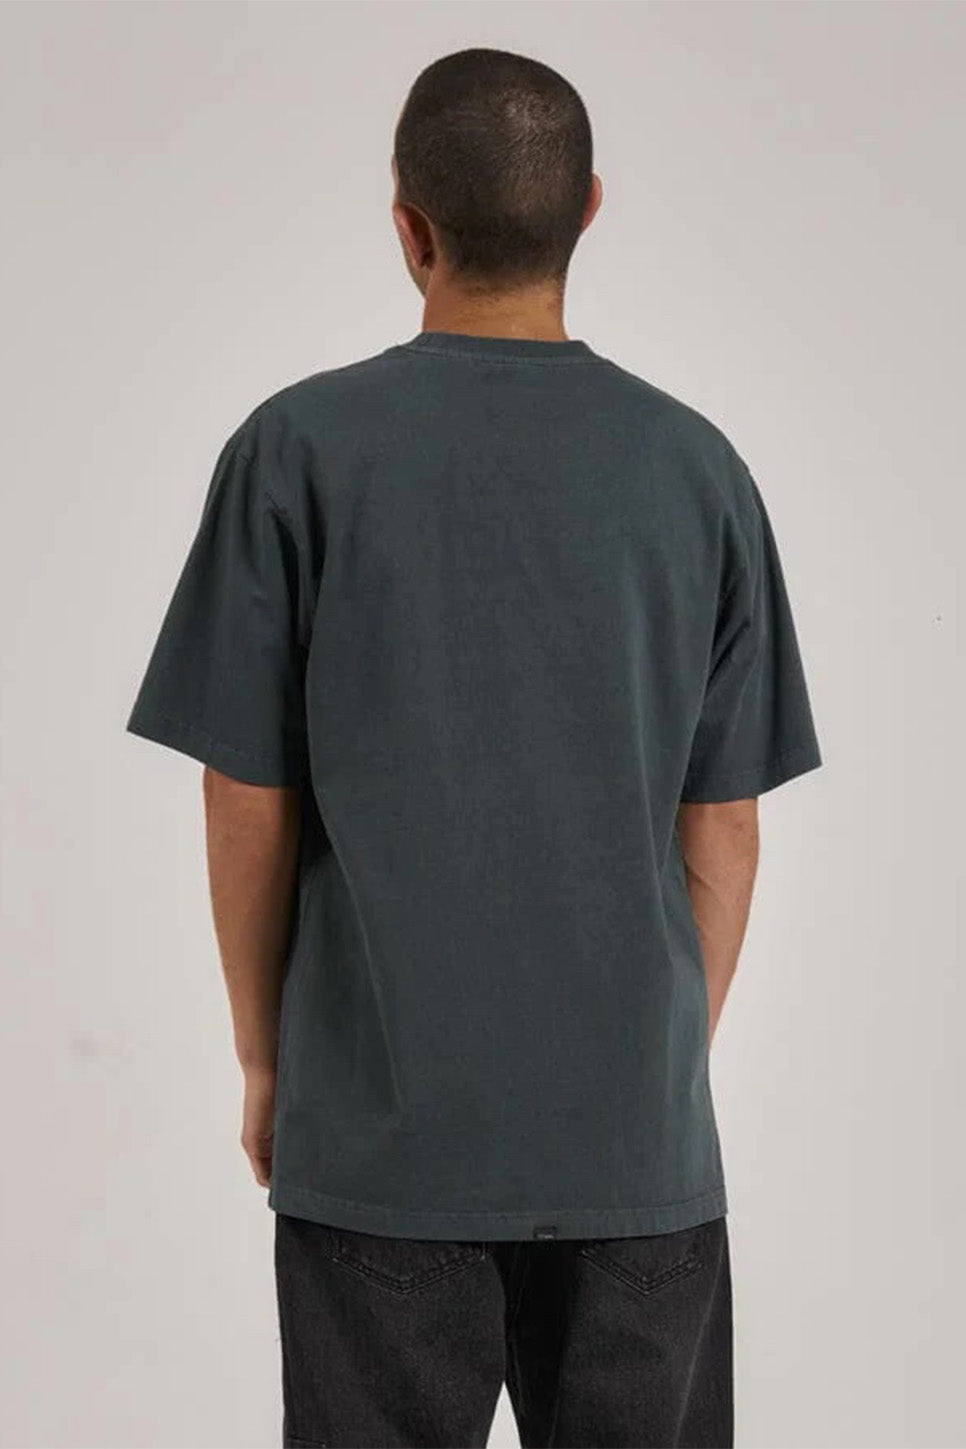 Thrills - Union Oversize Fit Pkt Tee - Spruce - Back